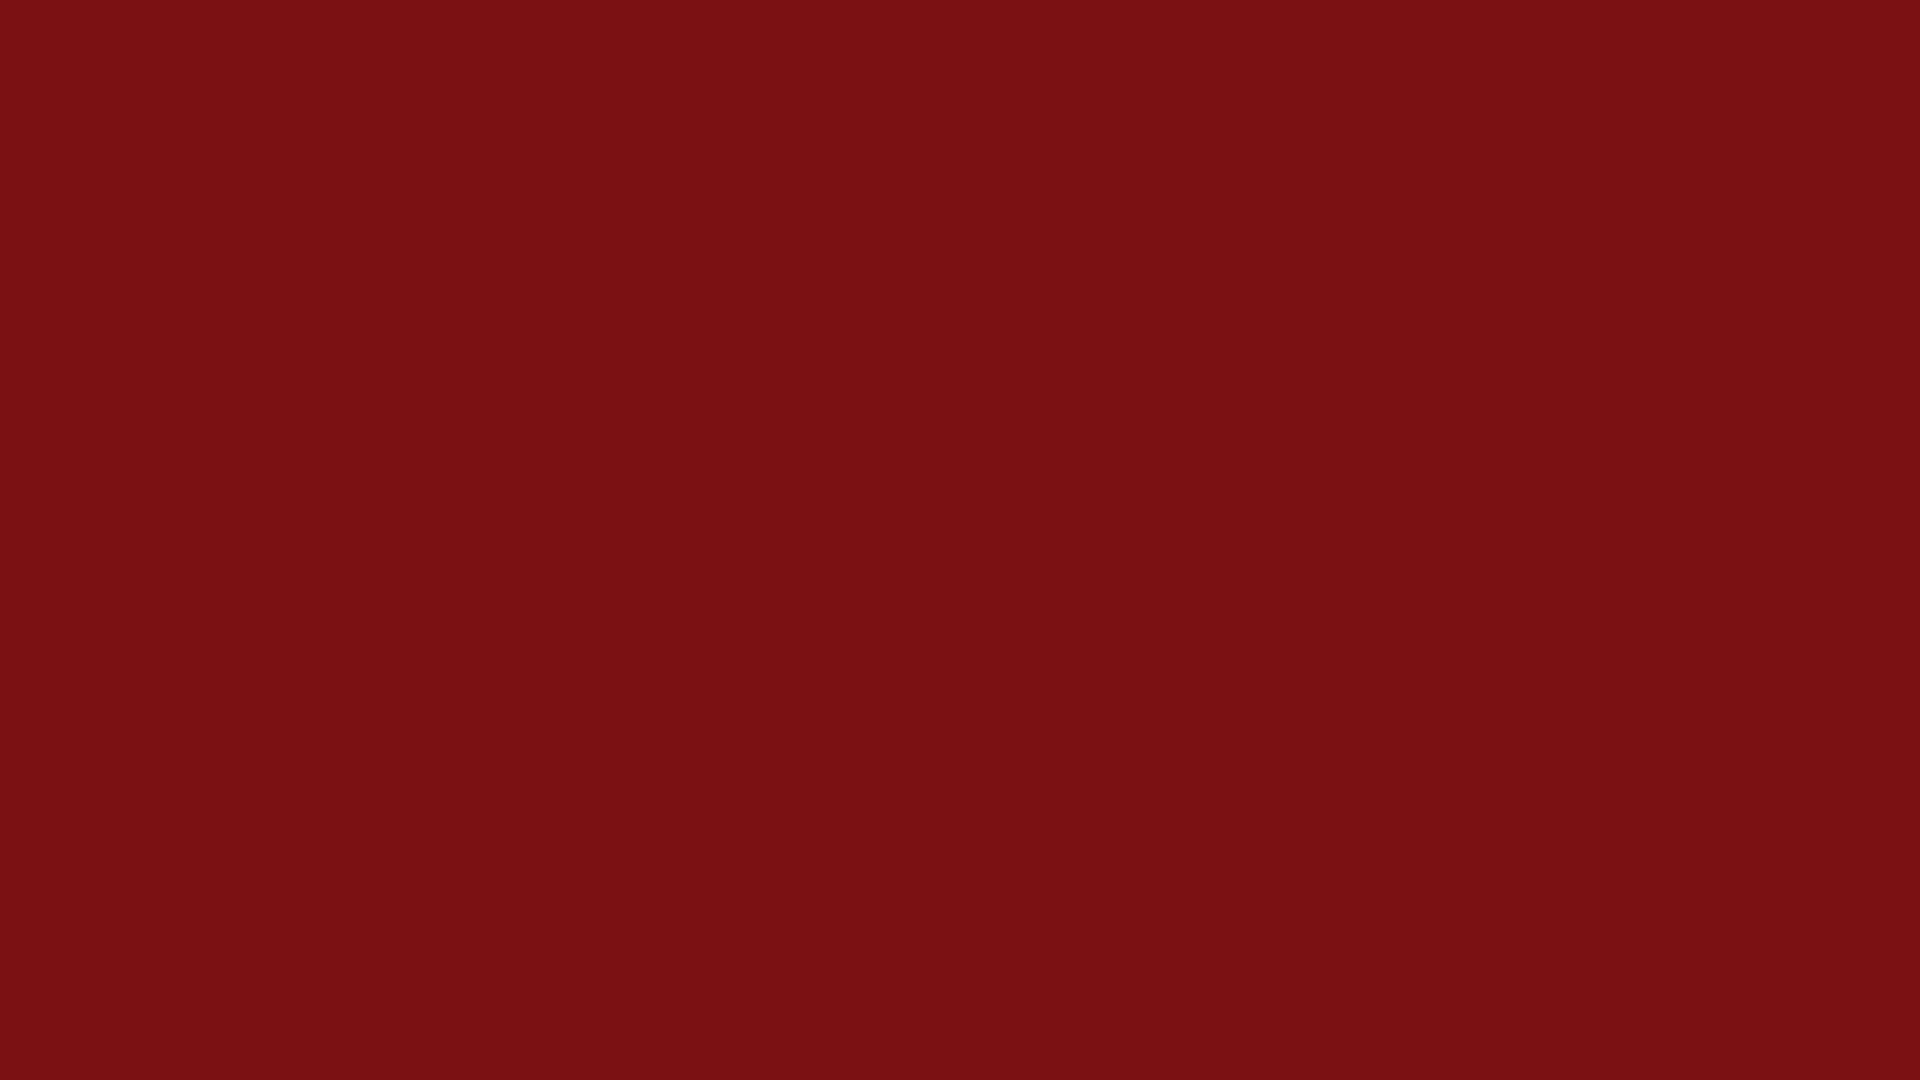 Maroon solid color background view and download the below background